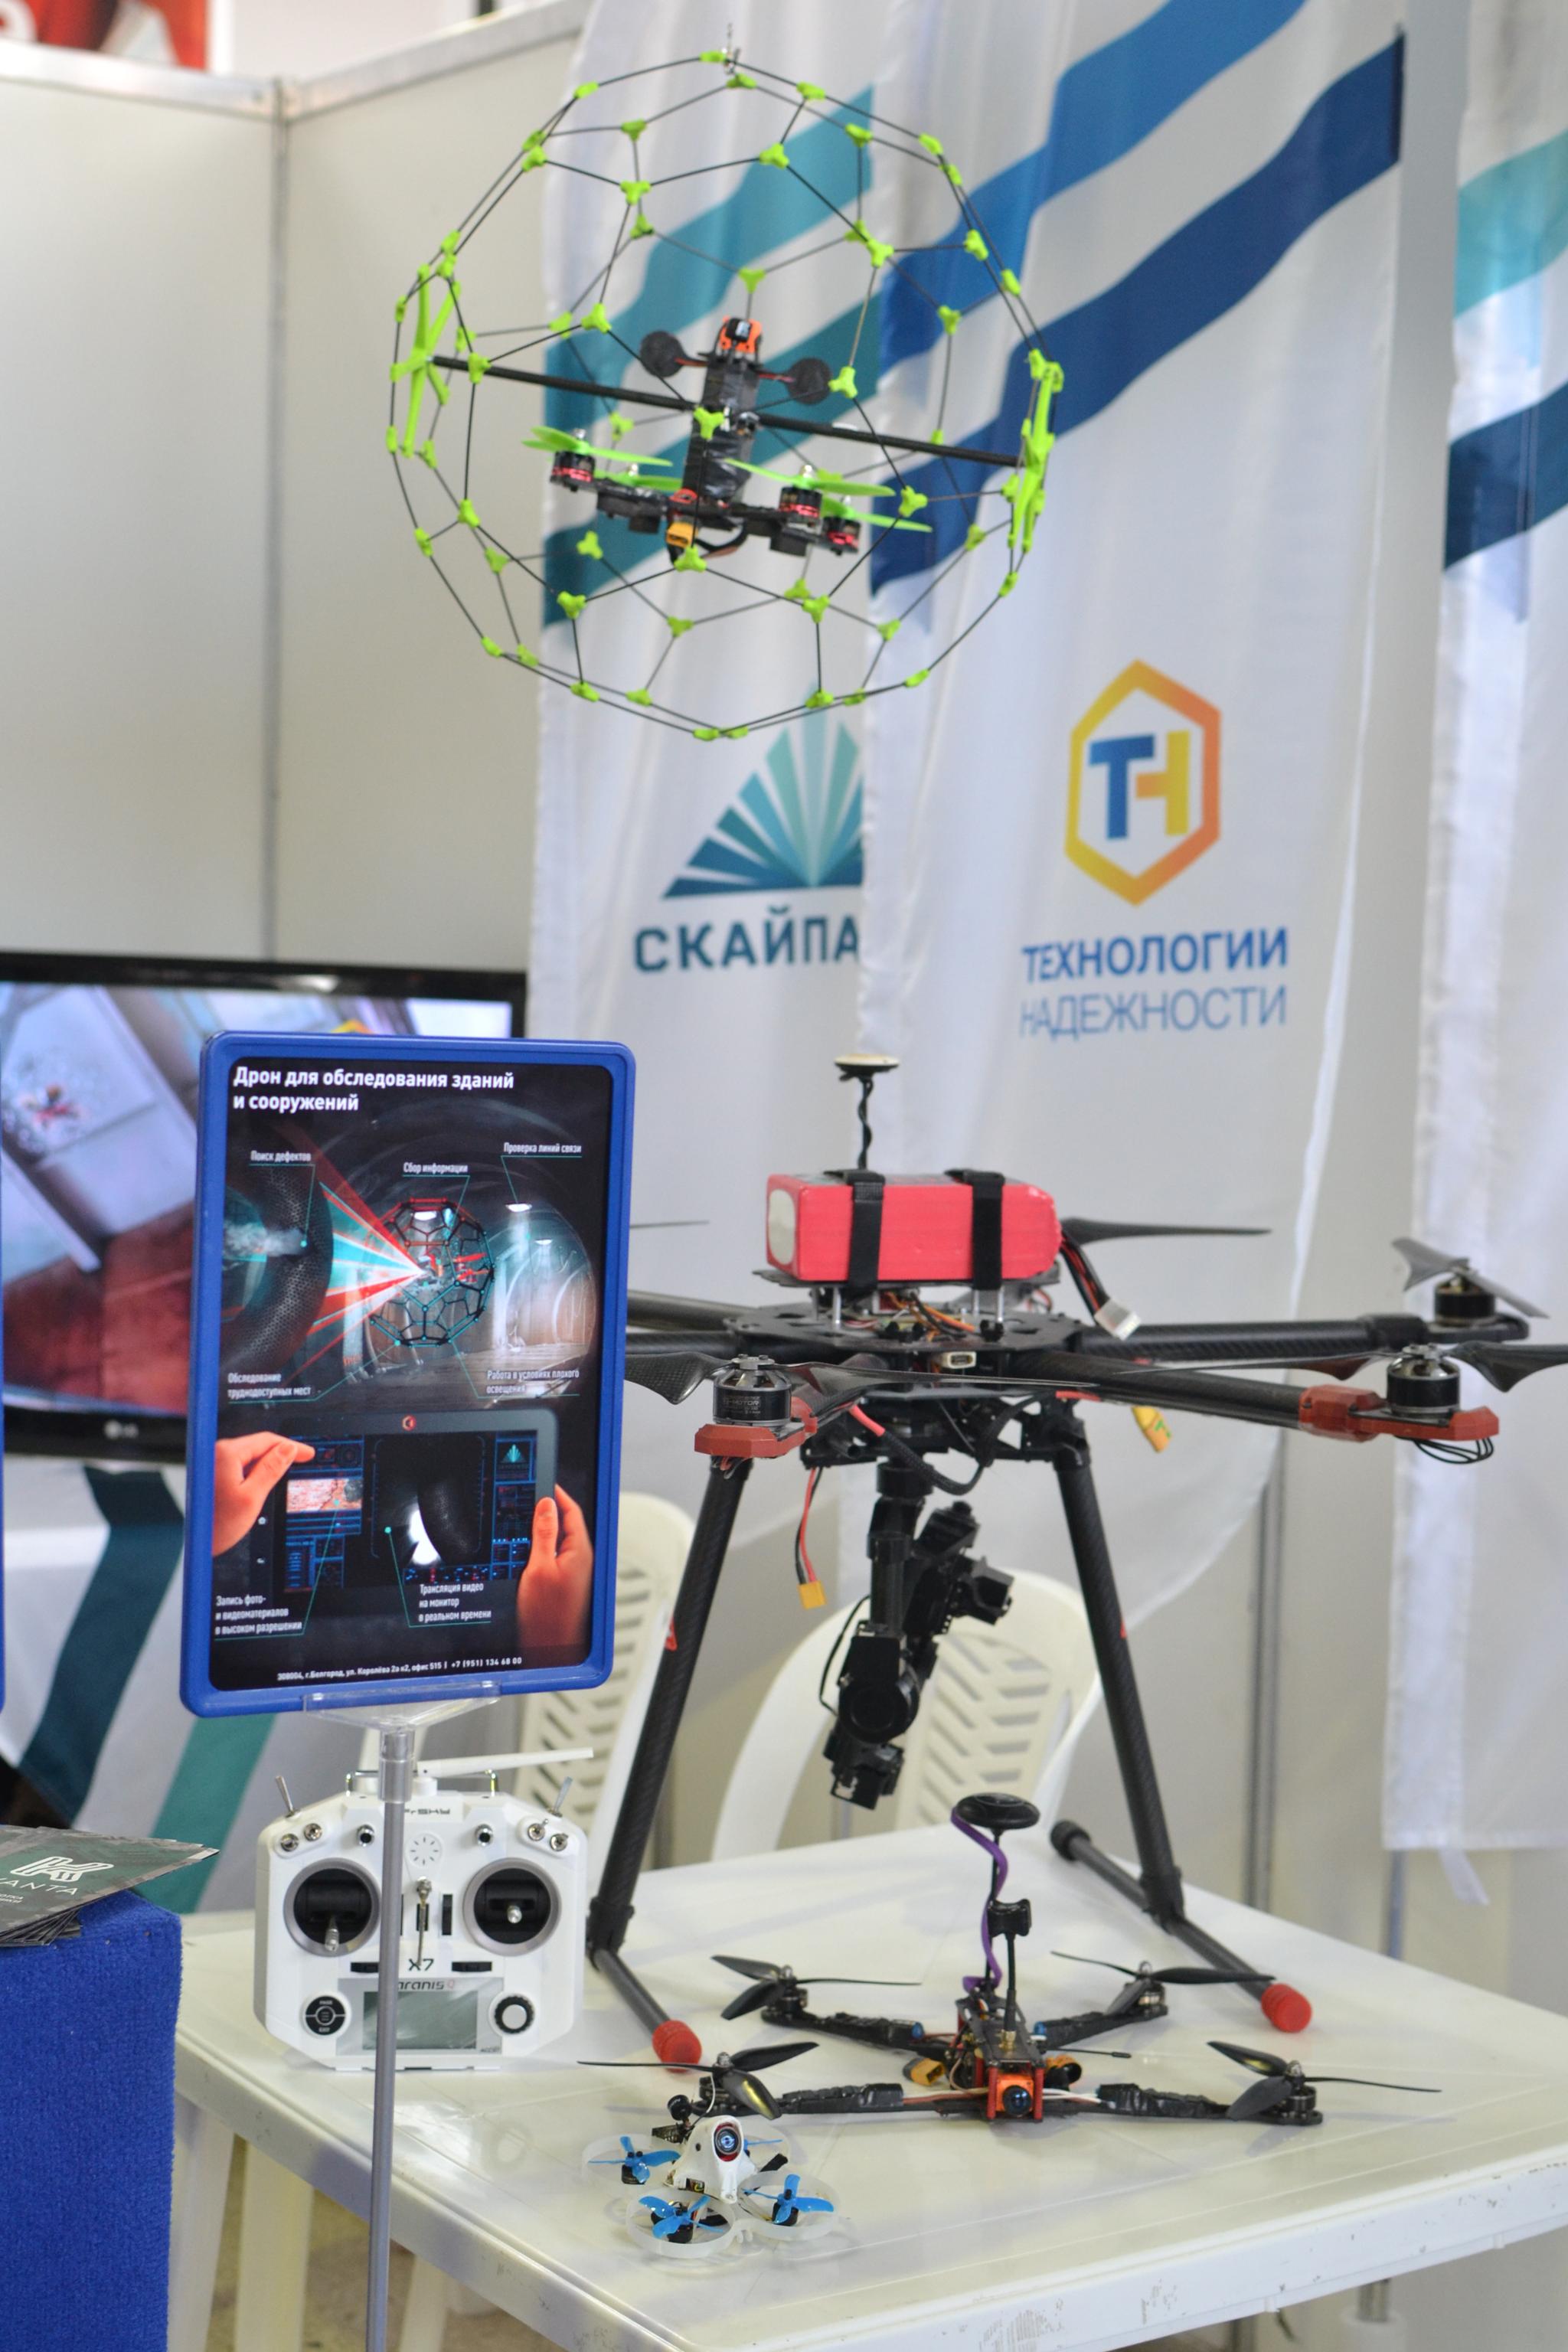 TH Group took part in the 15th Belgorod Forum and Exhibition titled Small and Medium-Sized Enterprises. Made in Belgorod